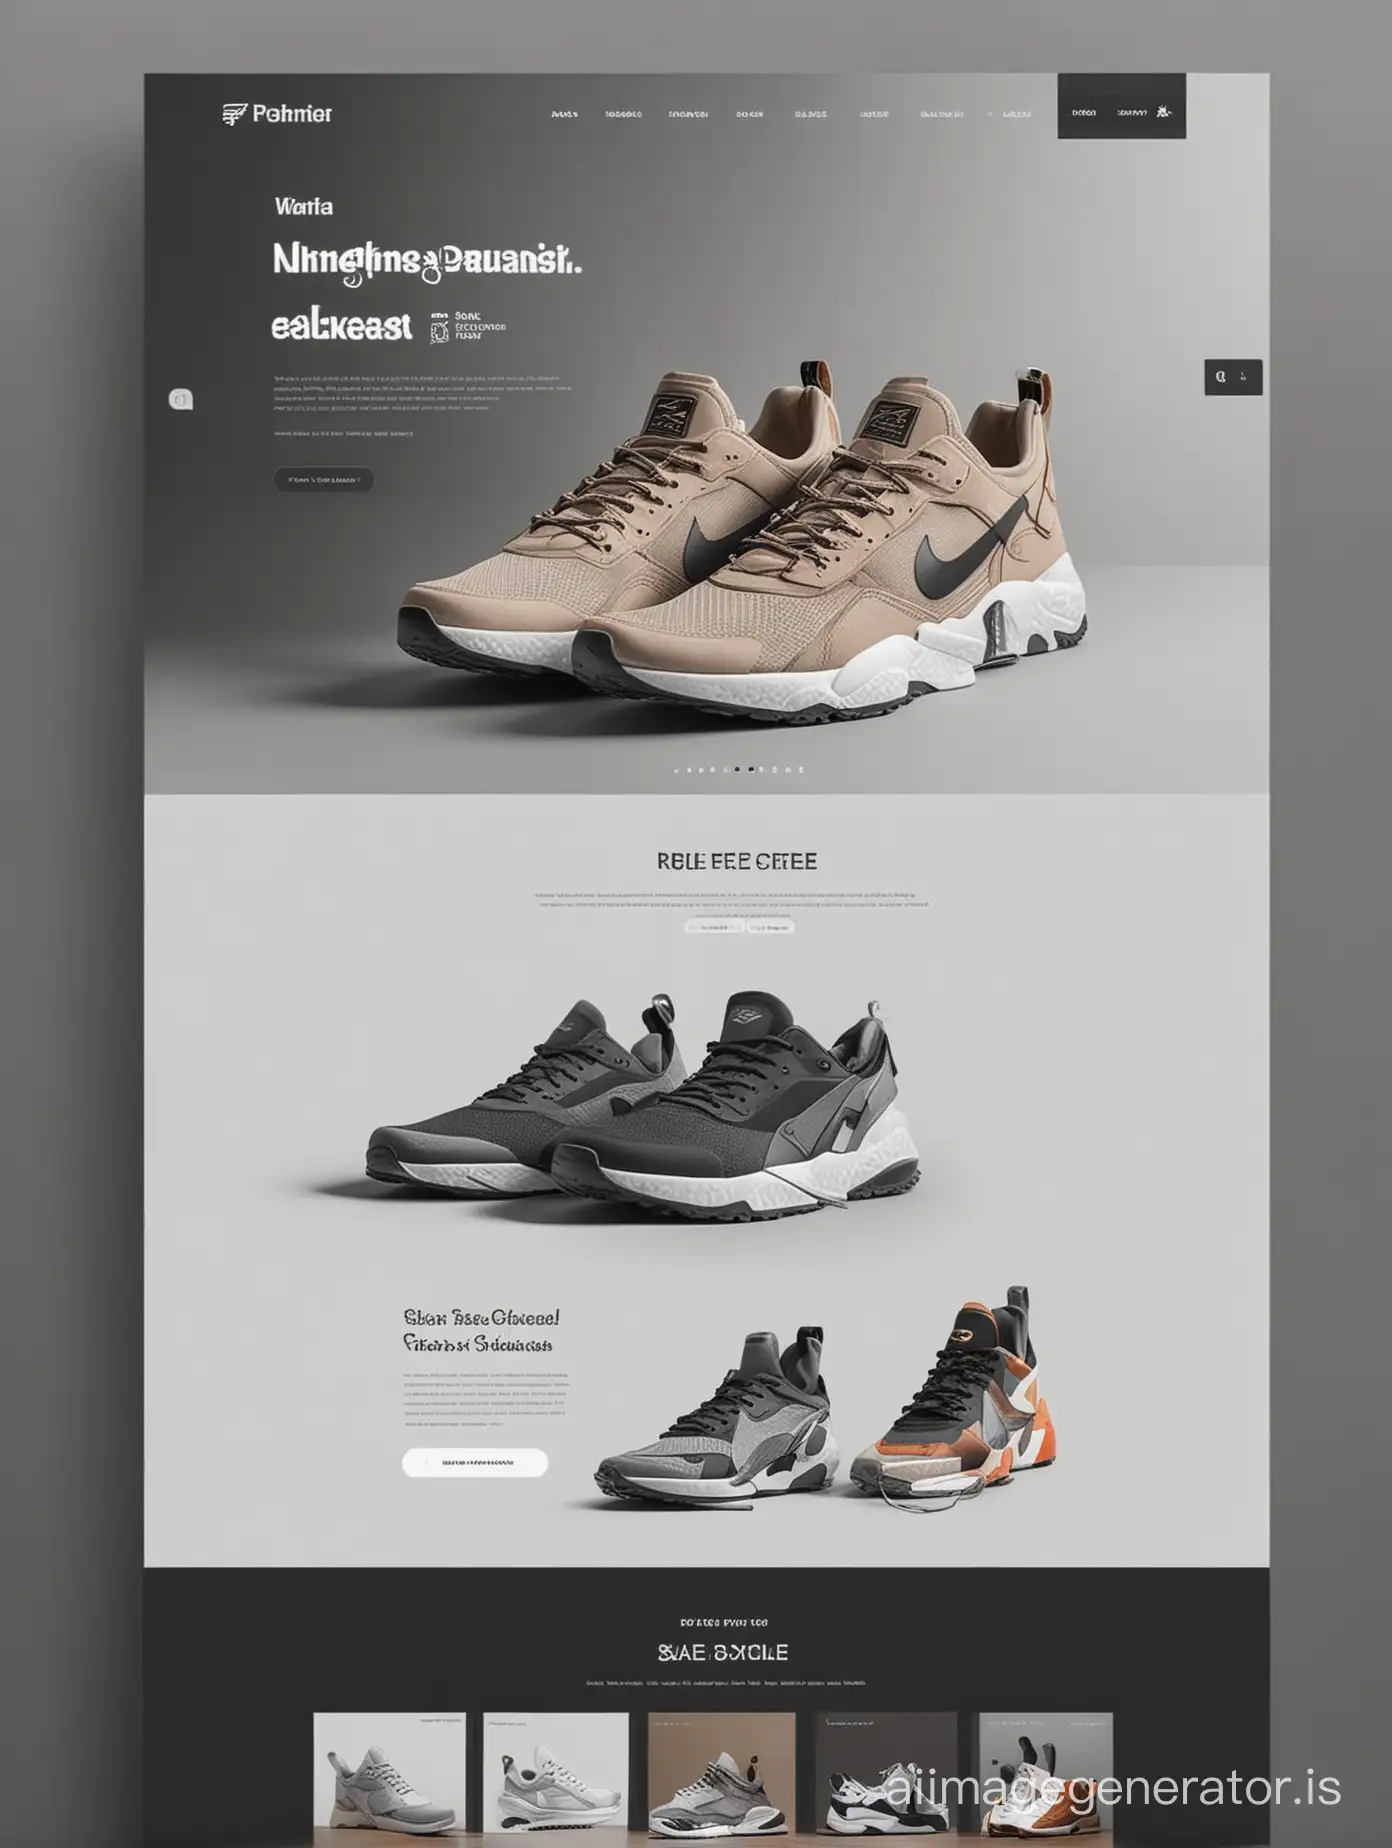 layout of landing page for selling sneakers